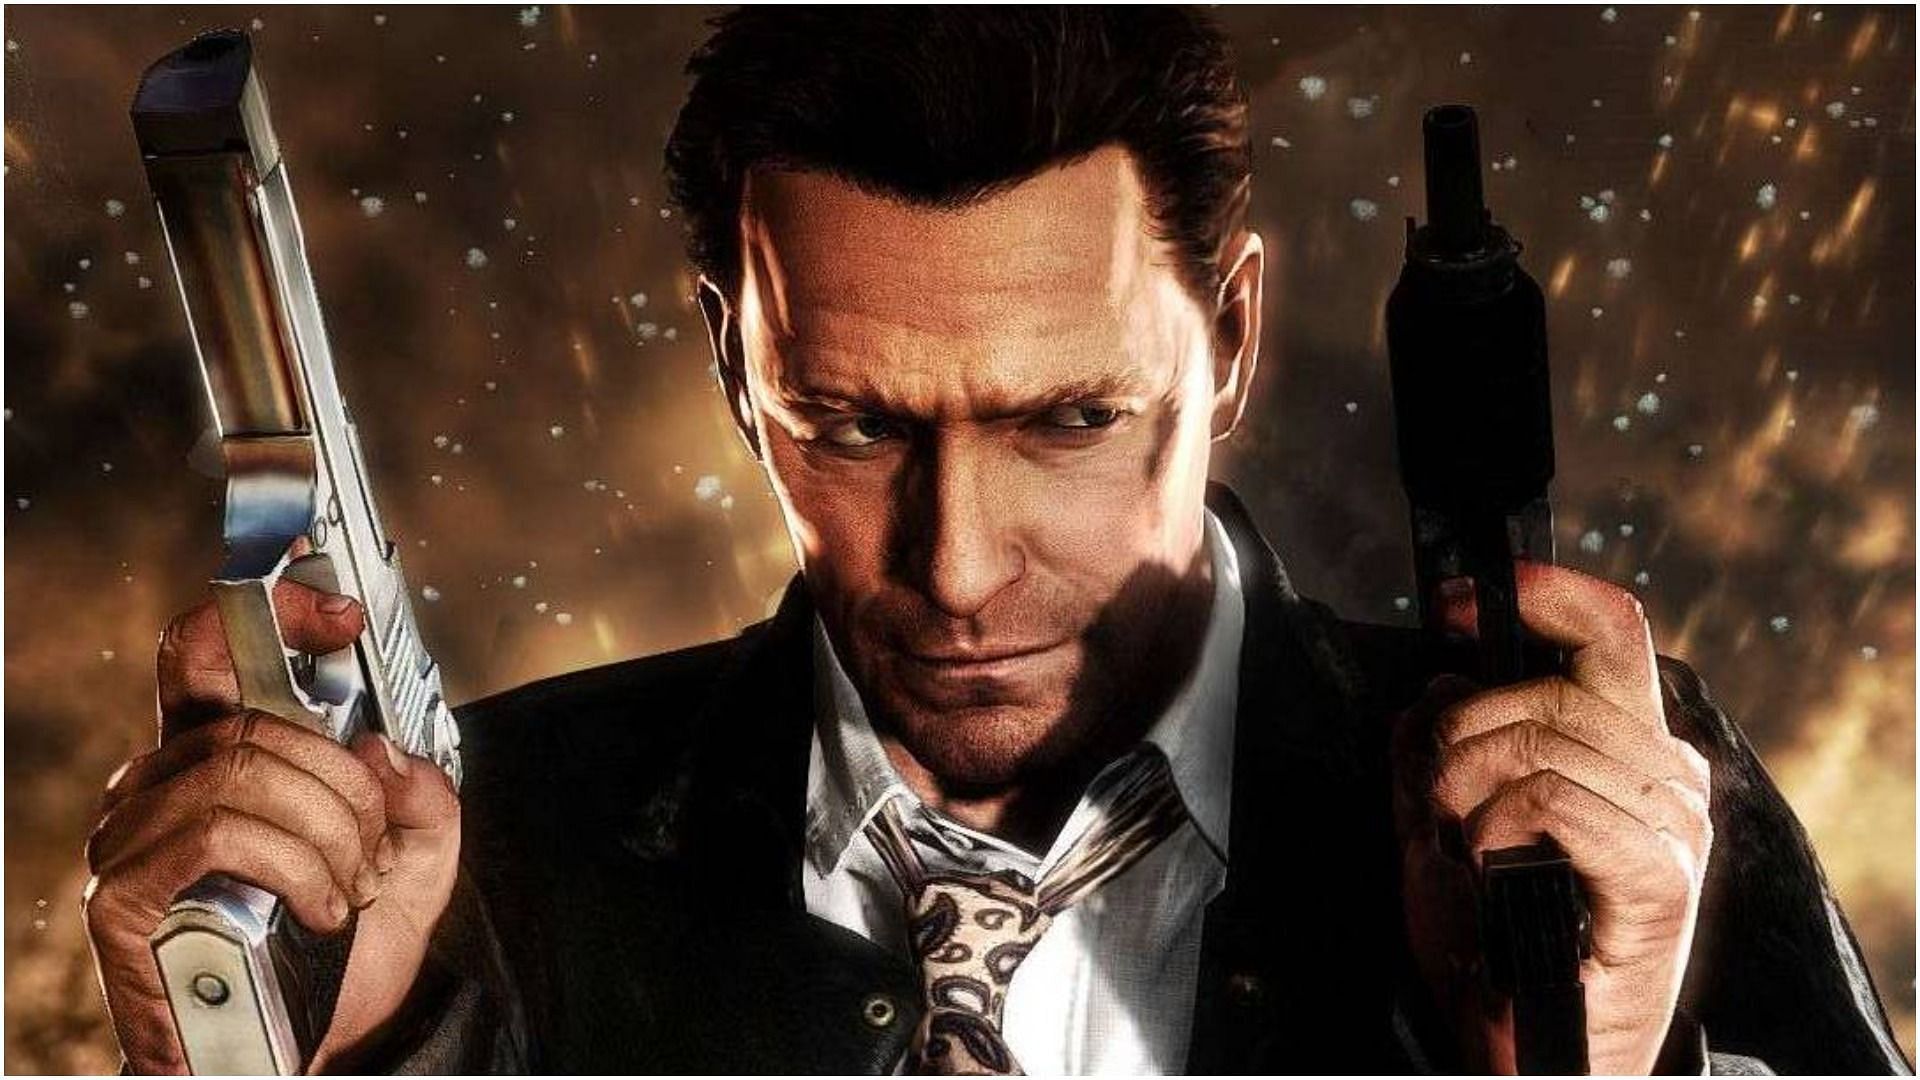 Remedy Entertainment announces Max Payne 1 and 2 remakes (Image via Remedy Entertainment)